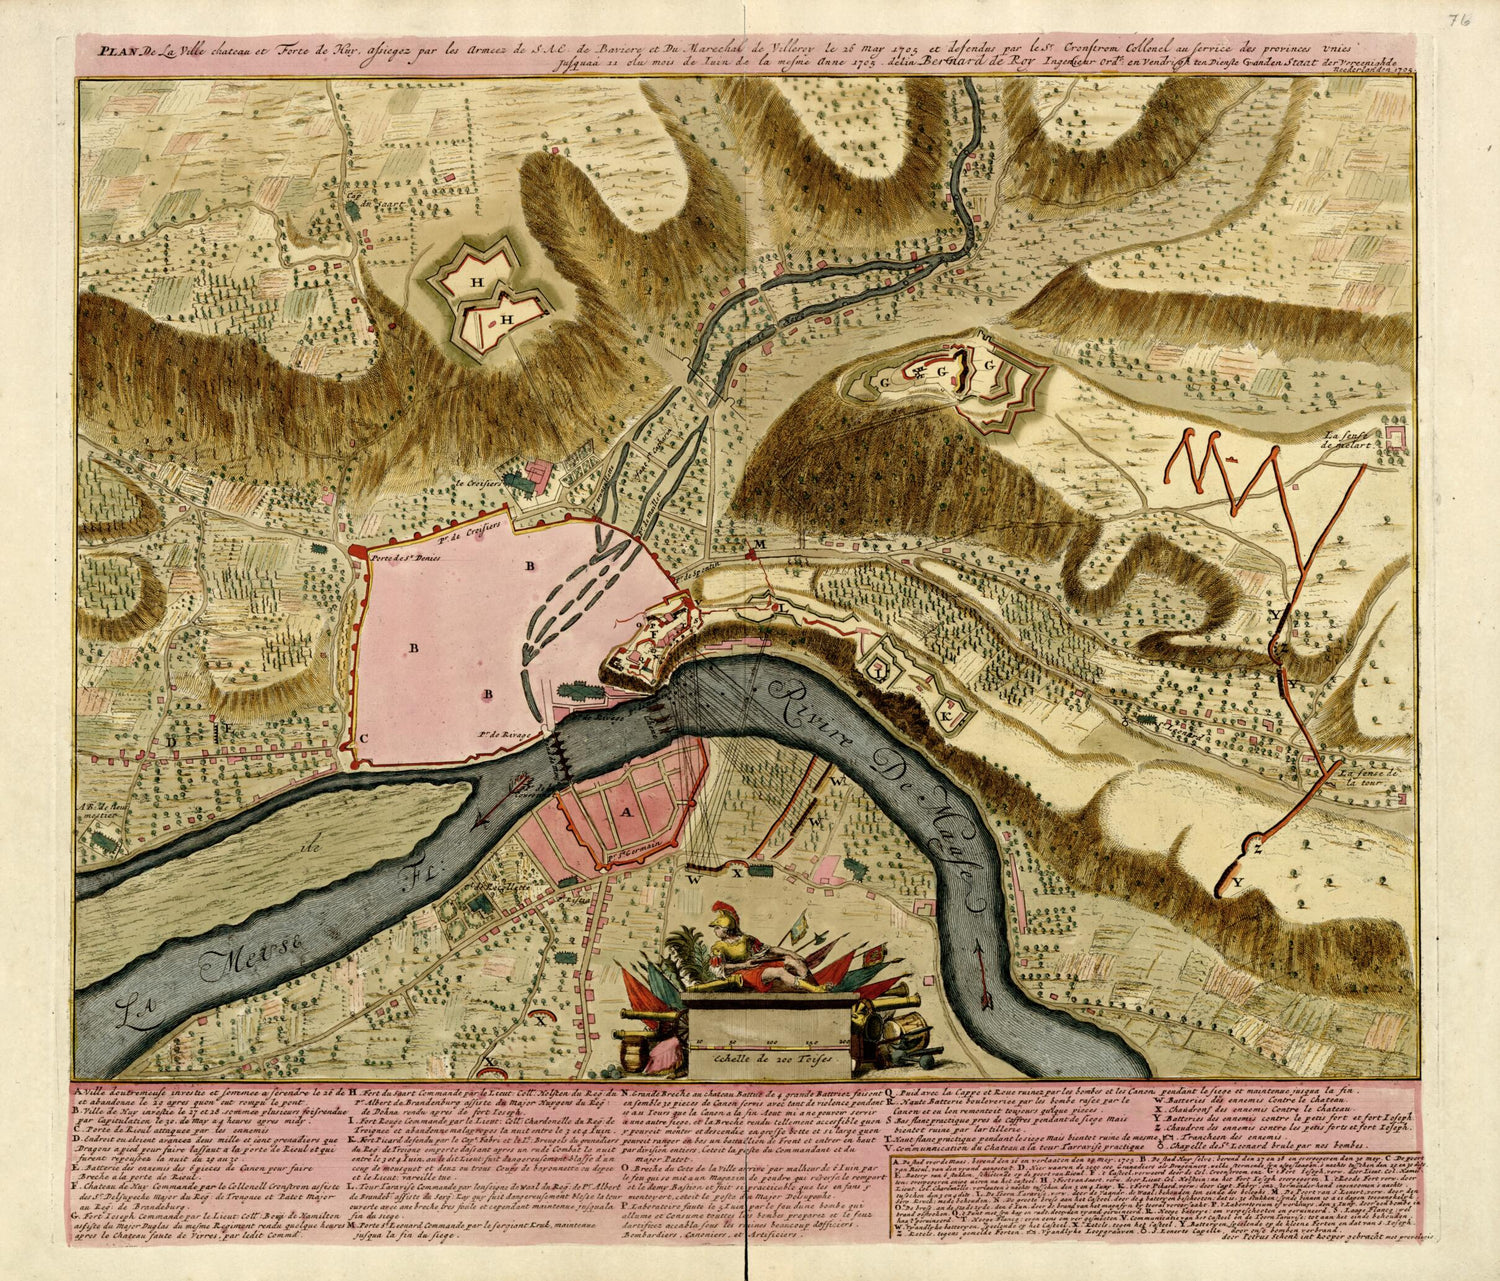 This old map of Plan De La Ville, Chateau Et Forte De Huy from a Collection of Plans of Fortifications and Battles, 1684-from 1709 from 1709 was created by Anna Beeck in 1709